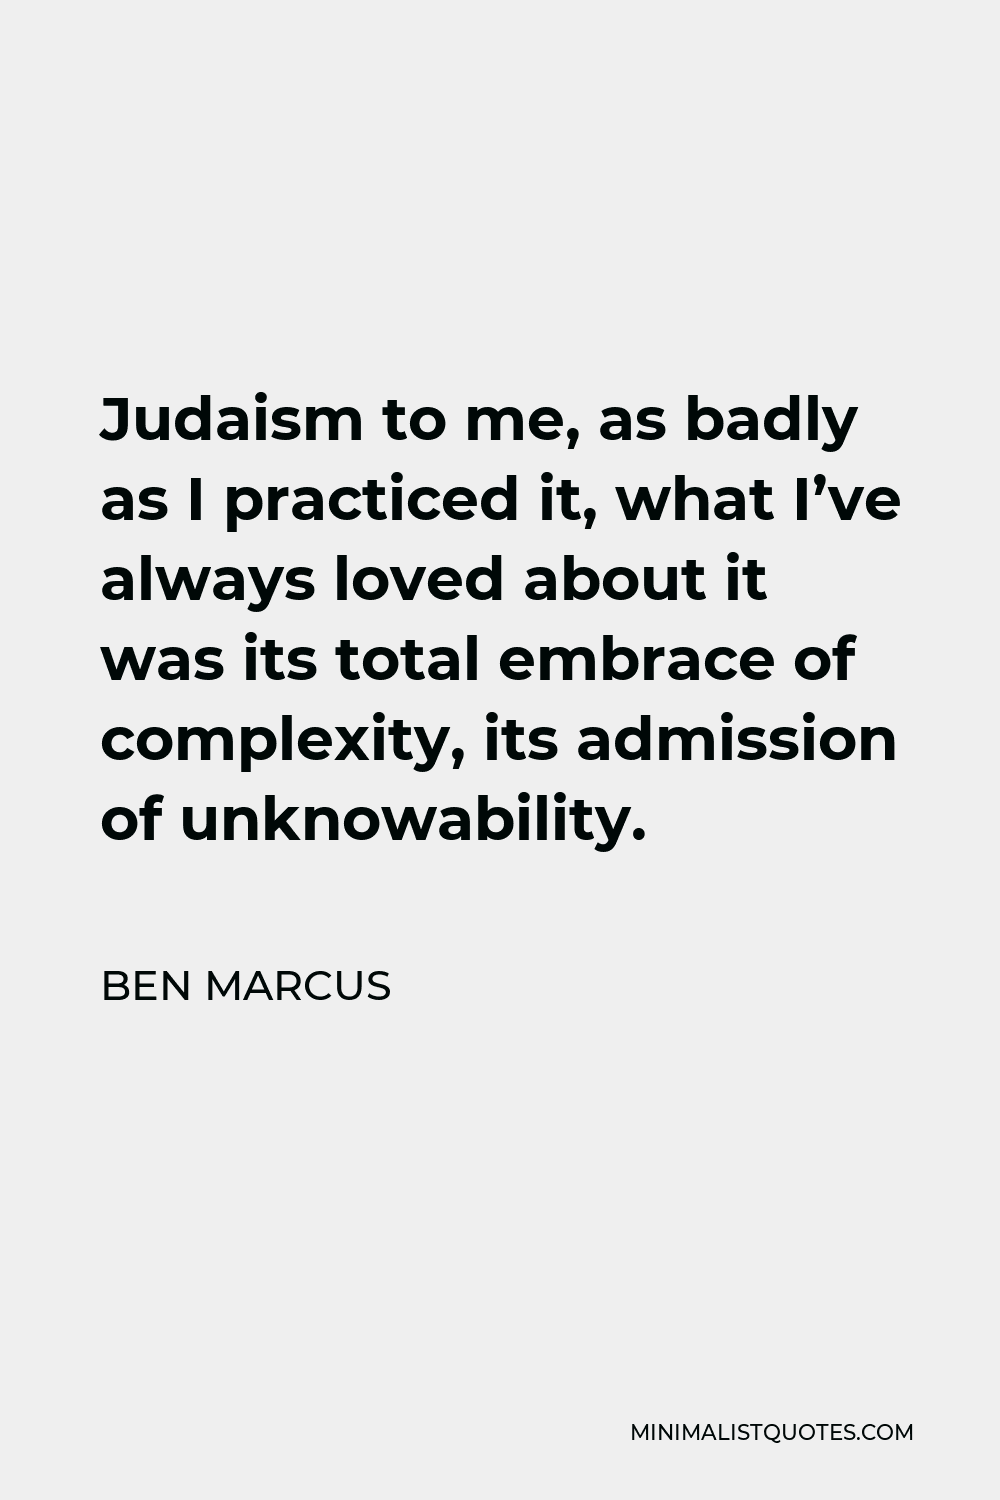 Ben Marcus Quote - Judaism to me, as badly as I practiced it, what I’ve always loved about it was its total embrace of complexity, its admission of unknowability.